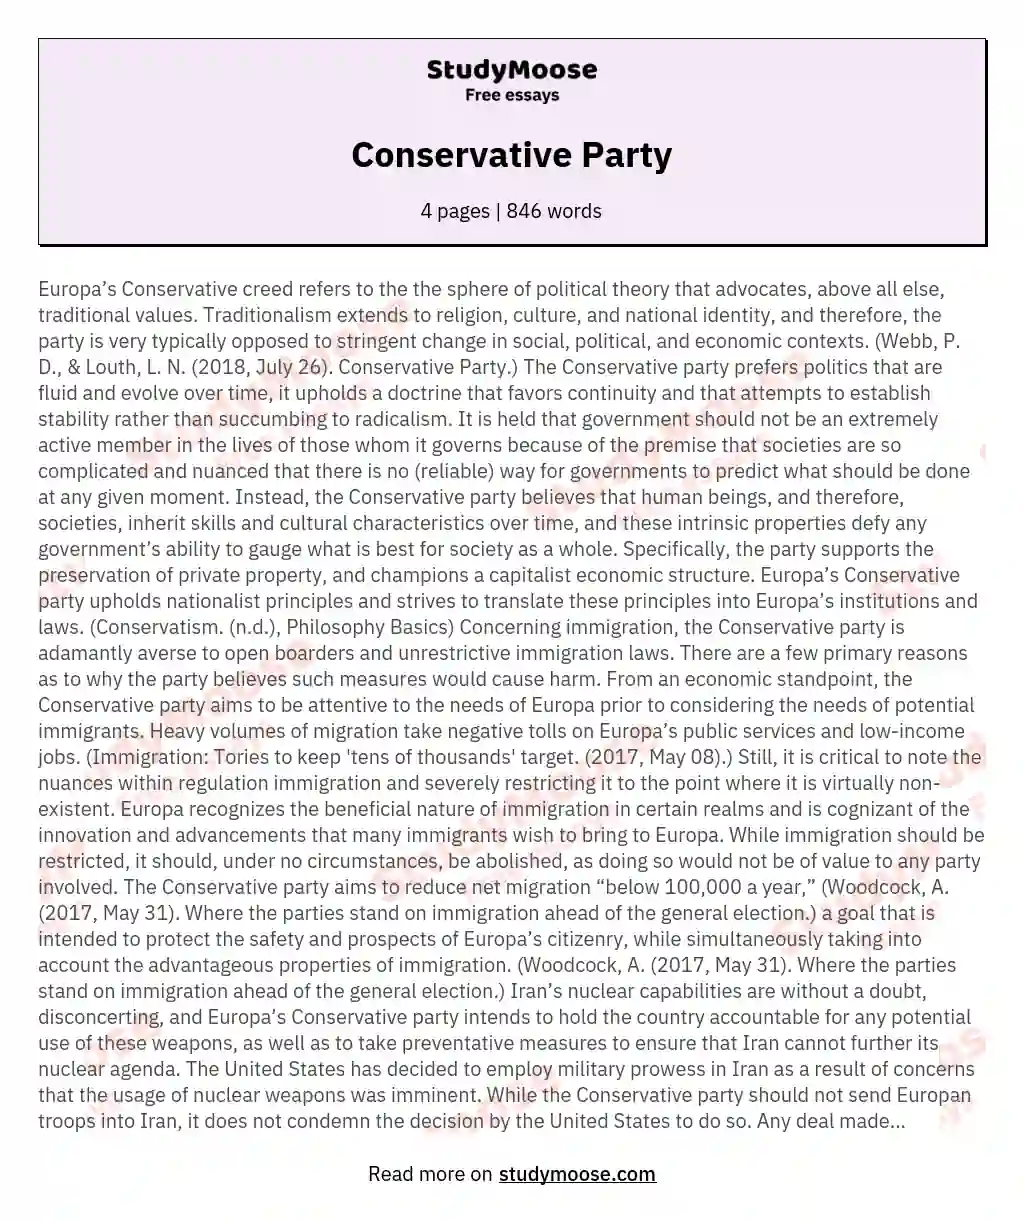 Conservative Party essay